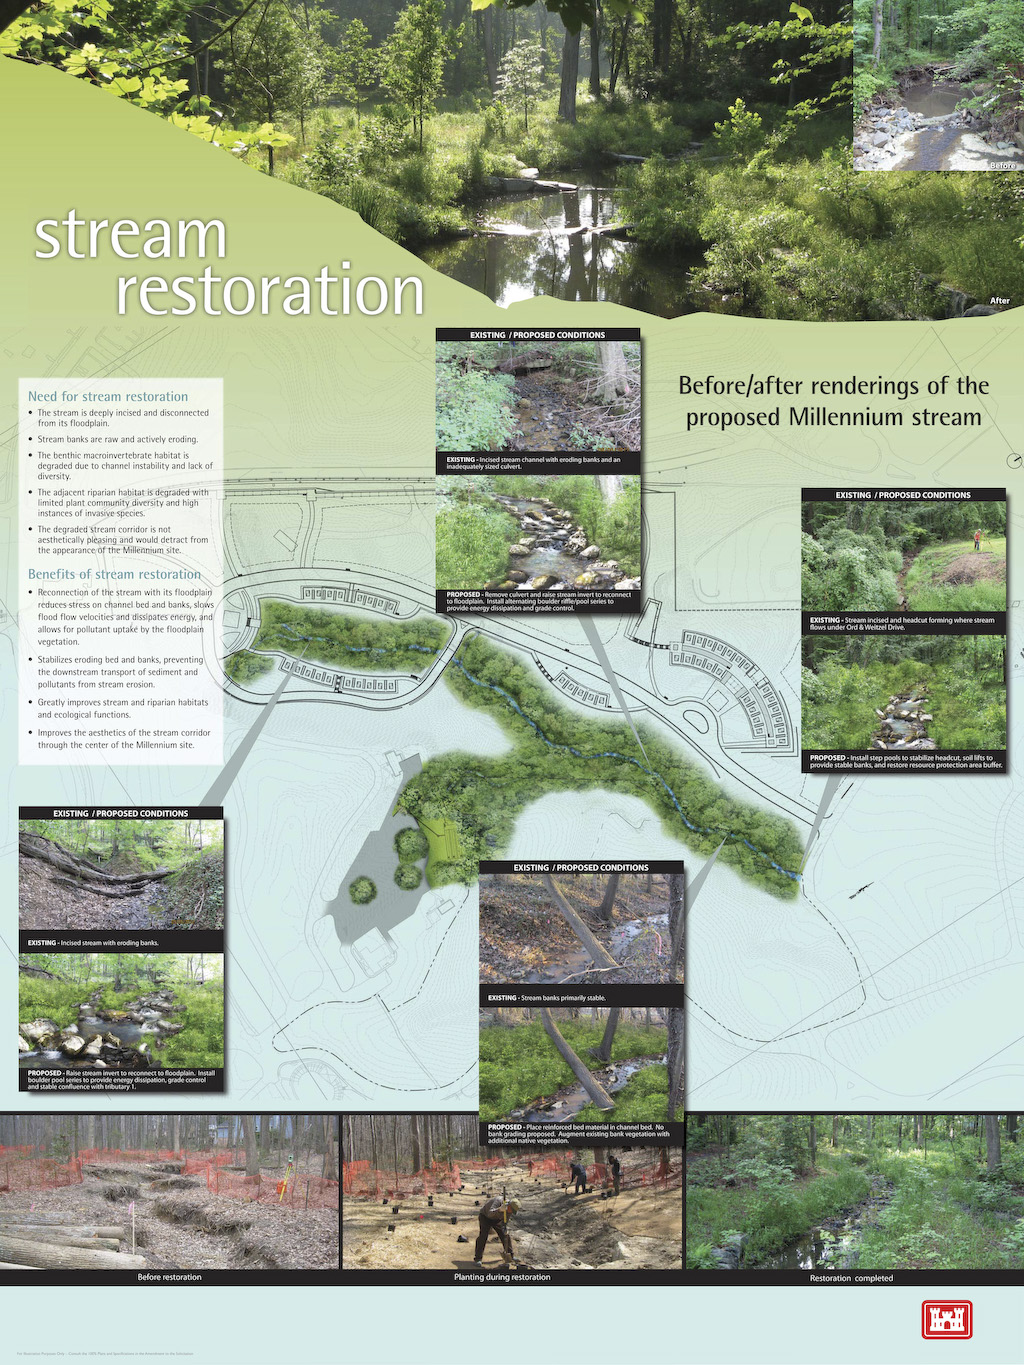 A graphic overview of the stream restoration that will take place as part of the Arlington National Cemetery's Millennium Project.